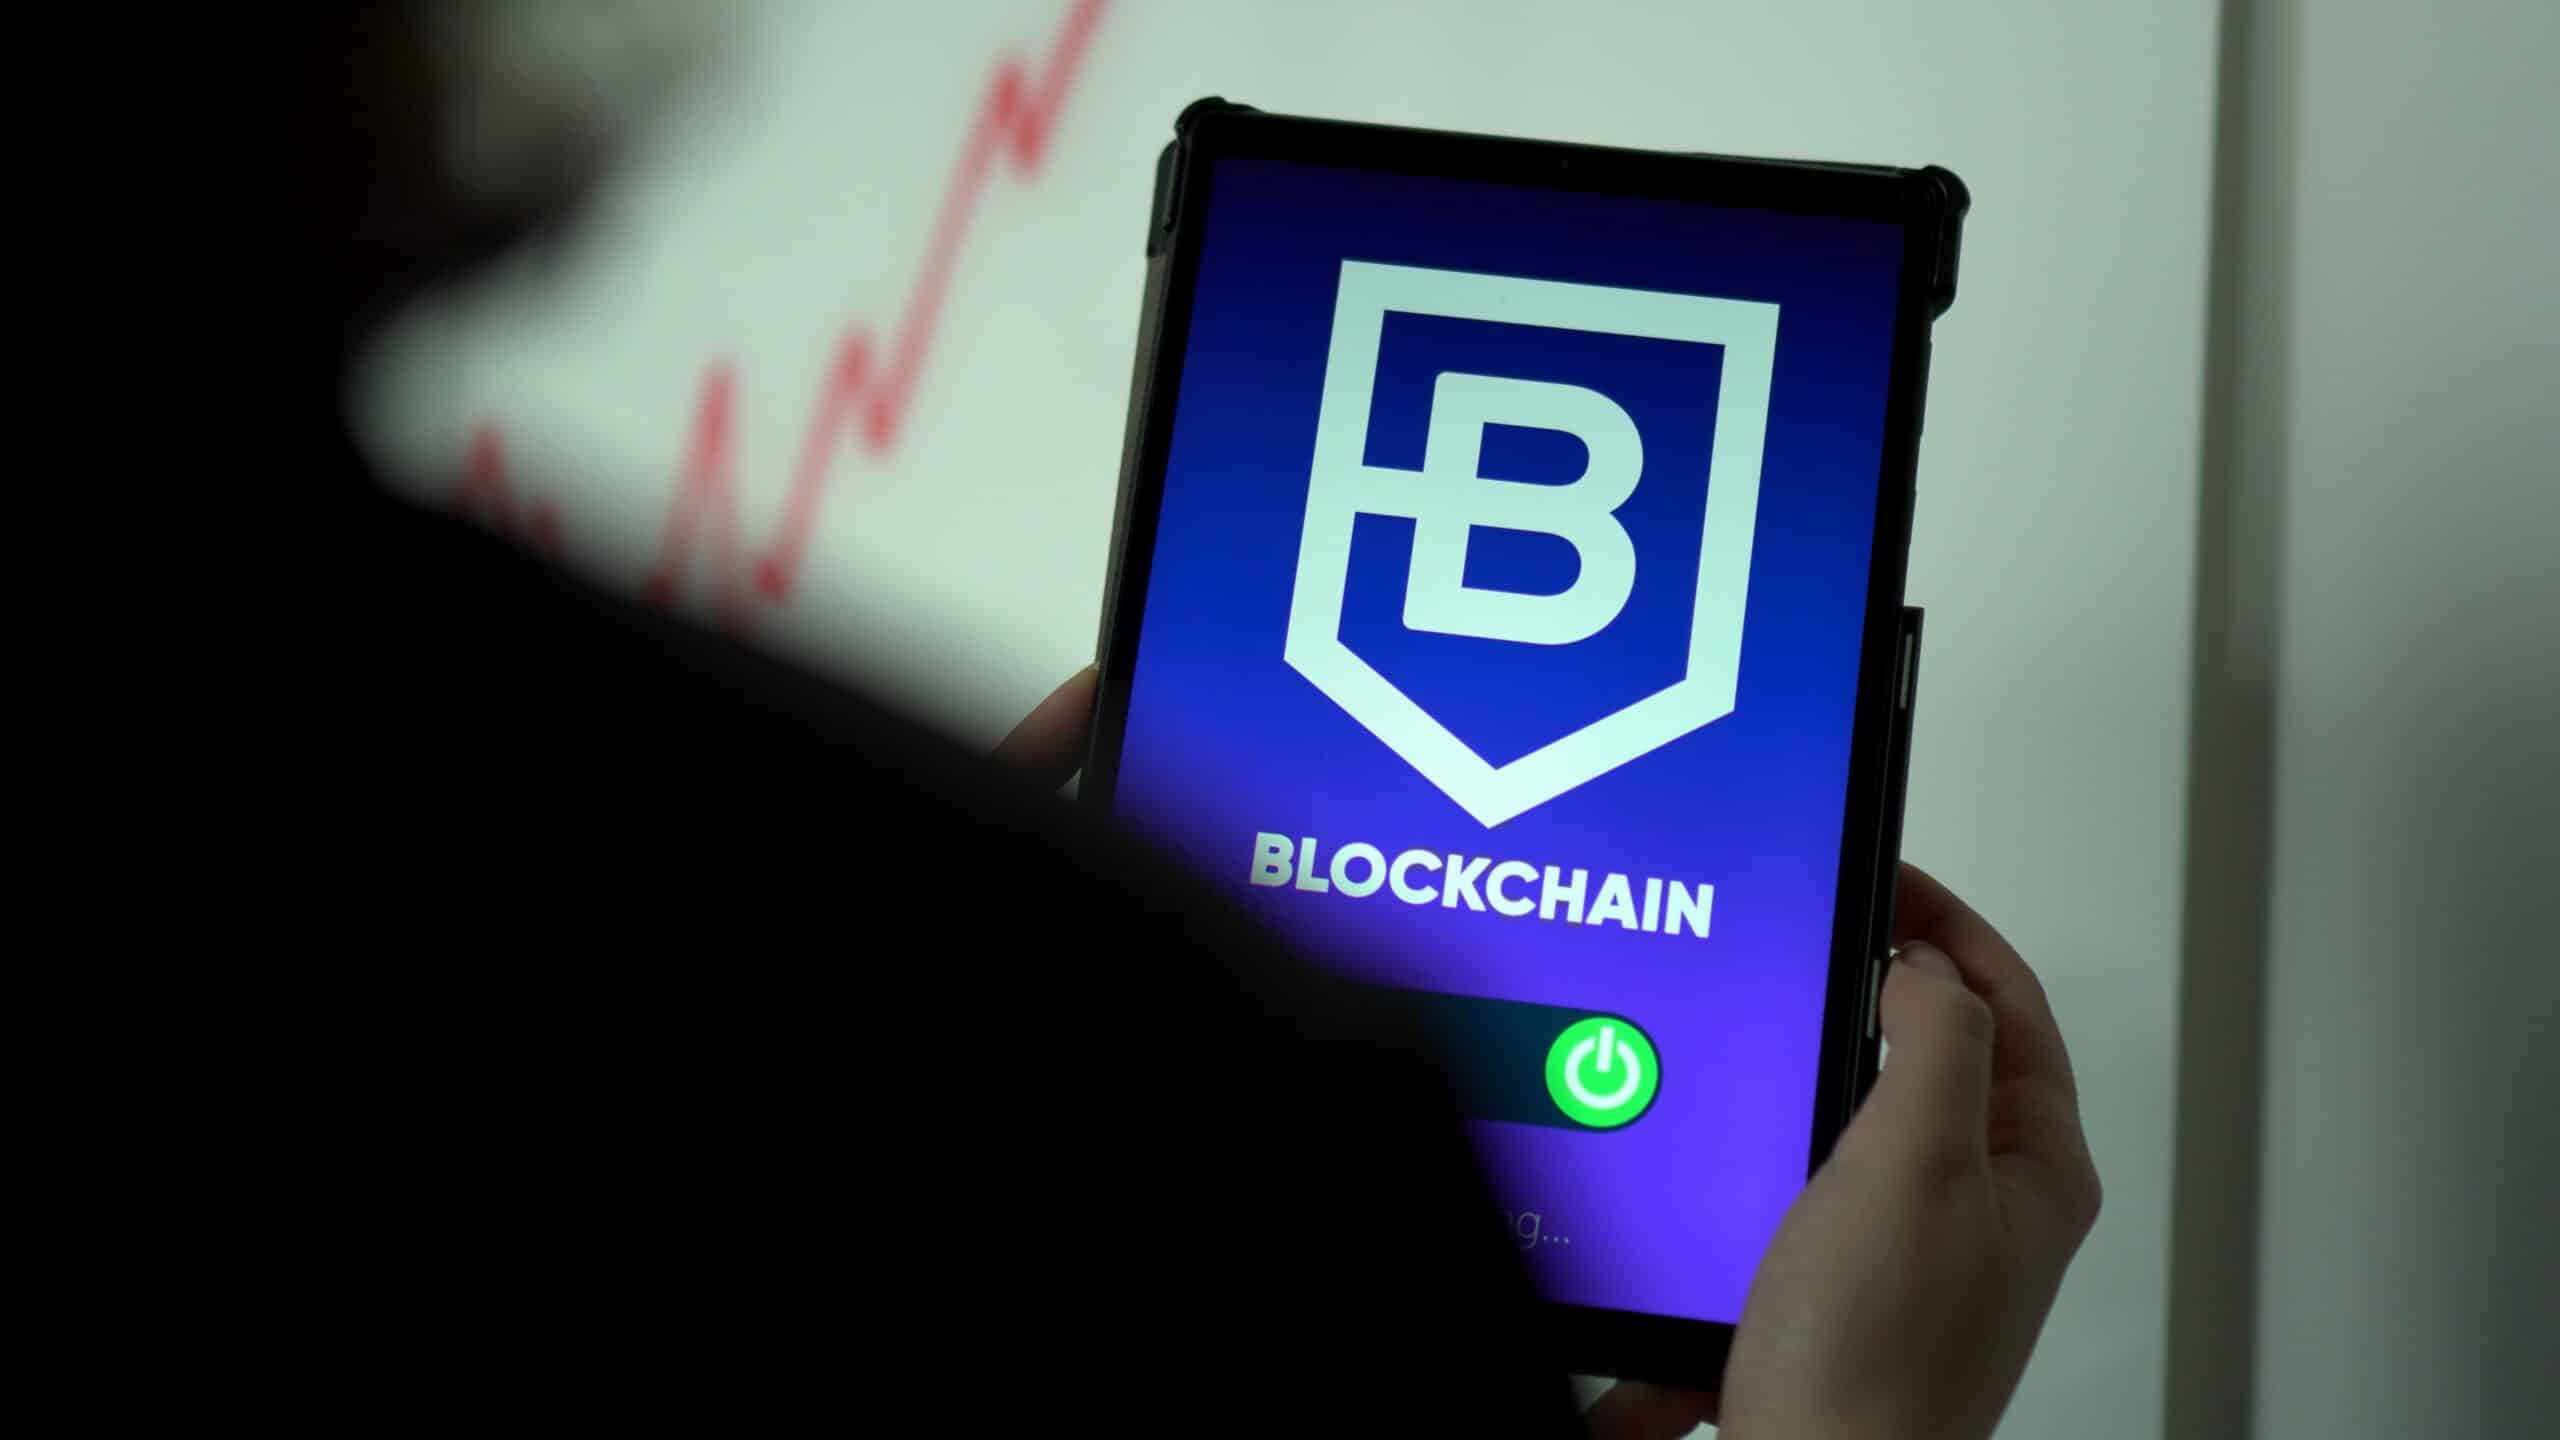 device showing "B" for  blockchain 